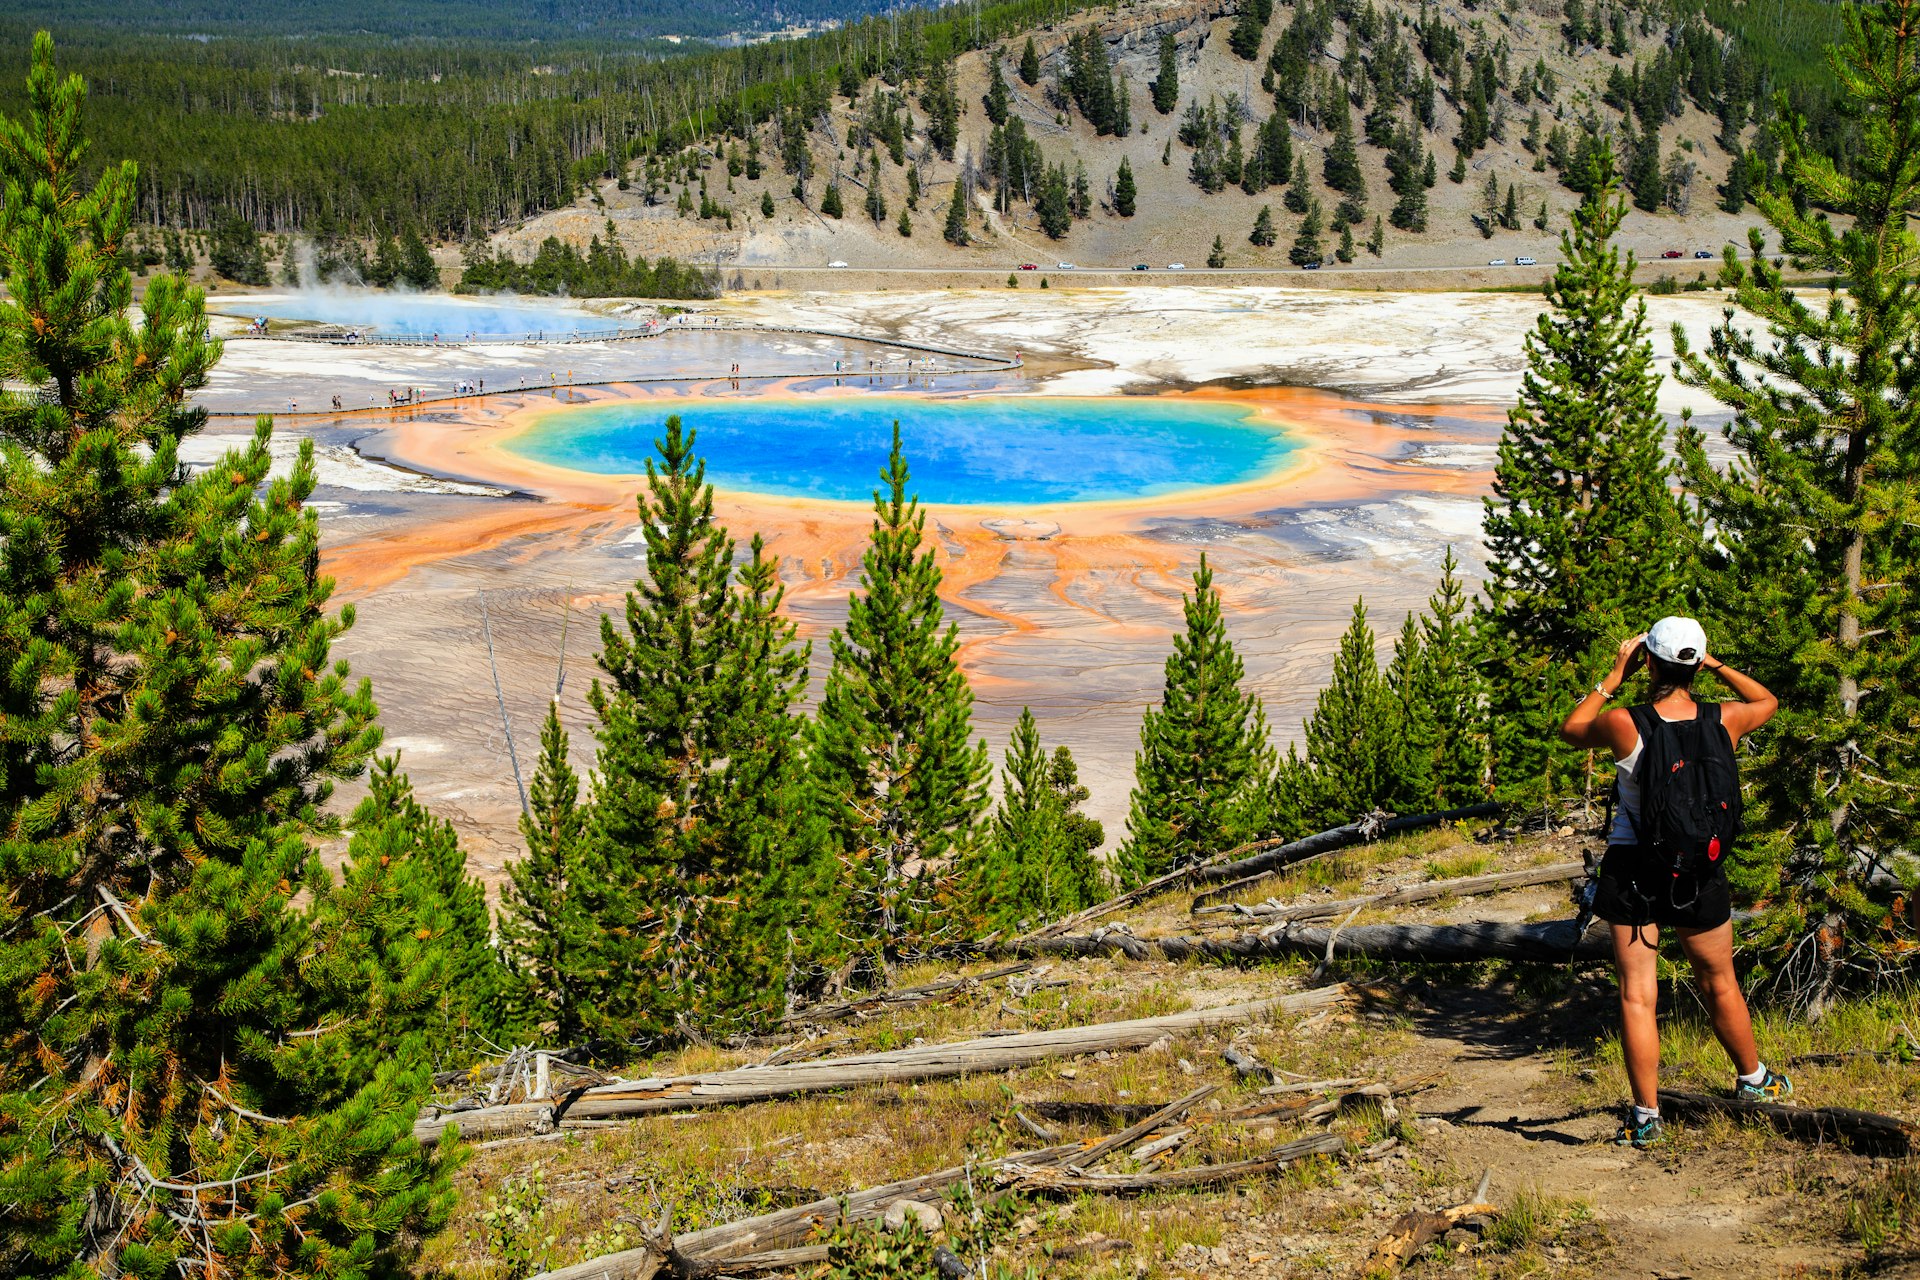 A hiker looking down through pine trees at Yellowstone National Park's Grand Prismatic Spring in Yellowstone National Park, a circular pool with turquoise water and yellow, orange and red rings